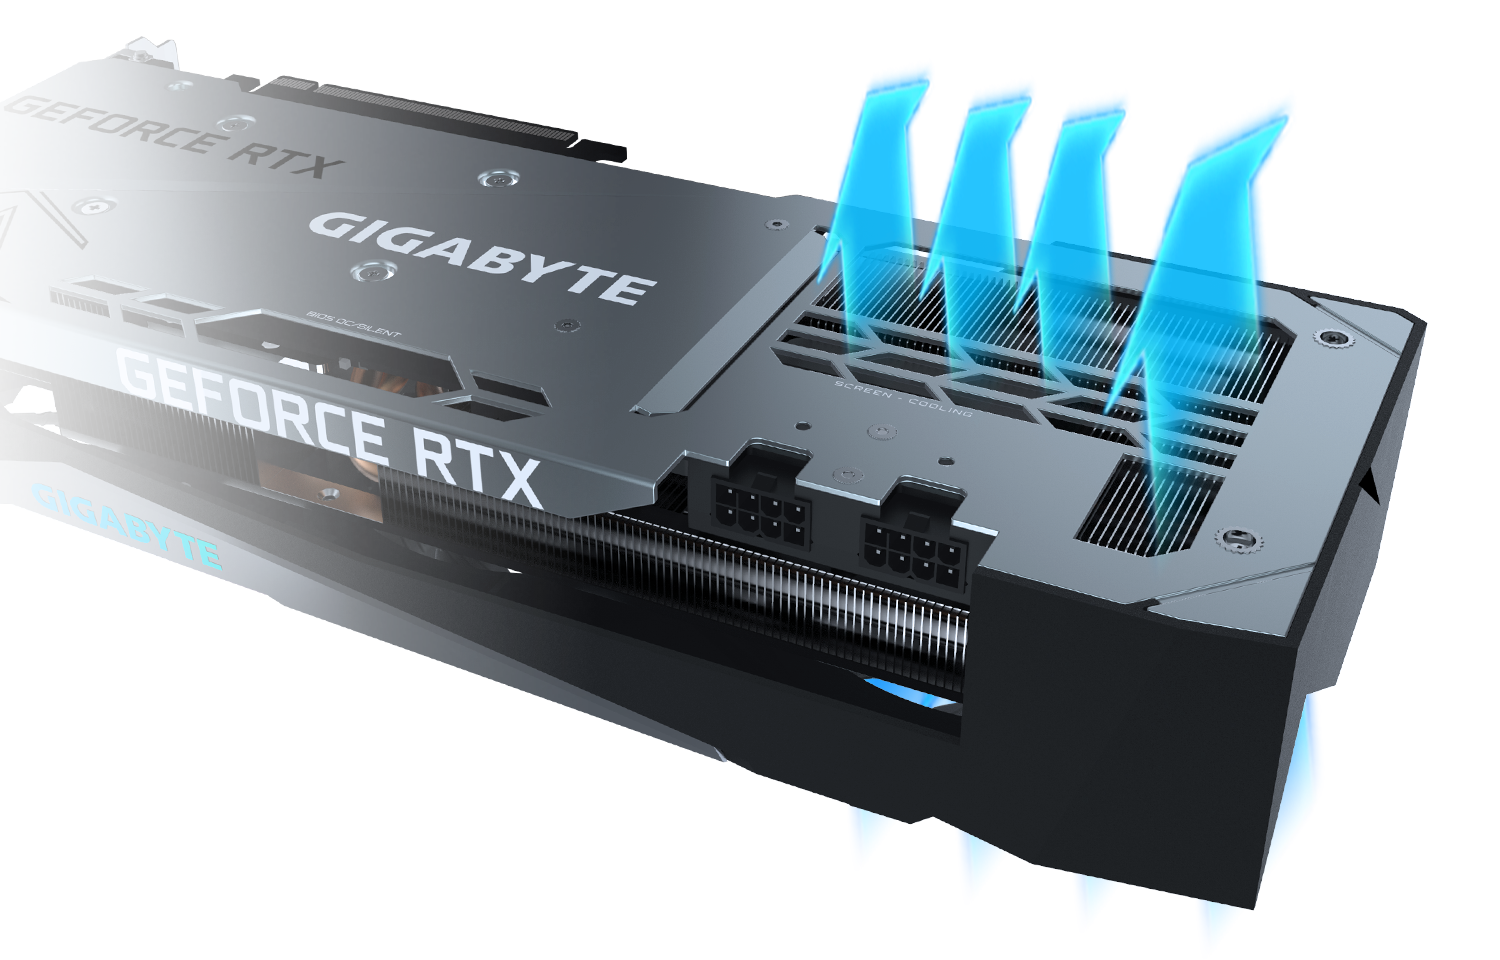 GeForce RTX™ 3070 Ti GAMING OC 8G (rev. 1.0) Key Features